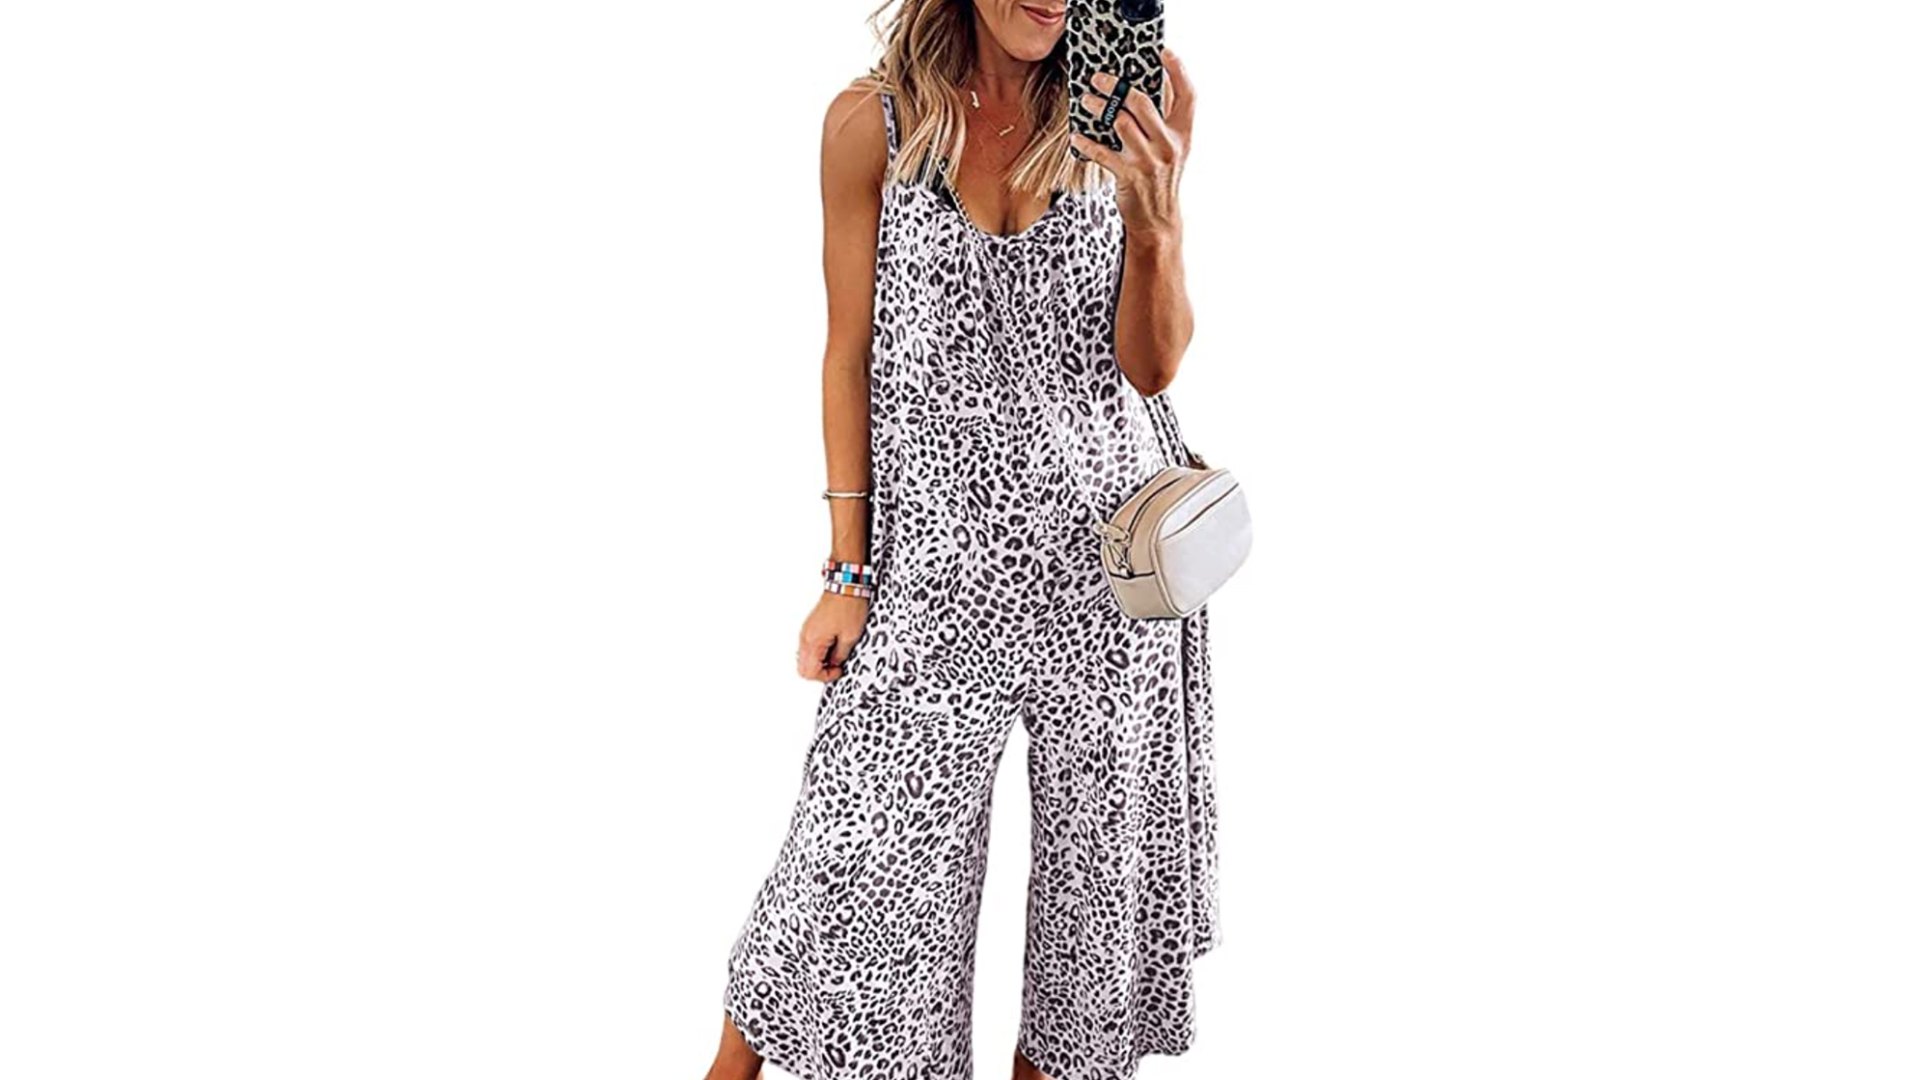 19 Slimming Rompers That We Can't Wait to Start Wearing